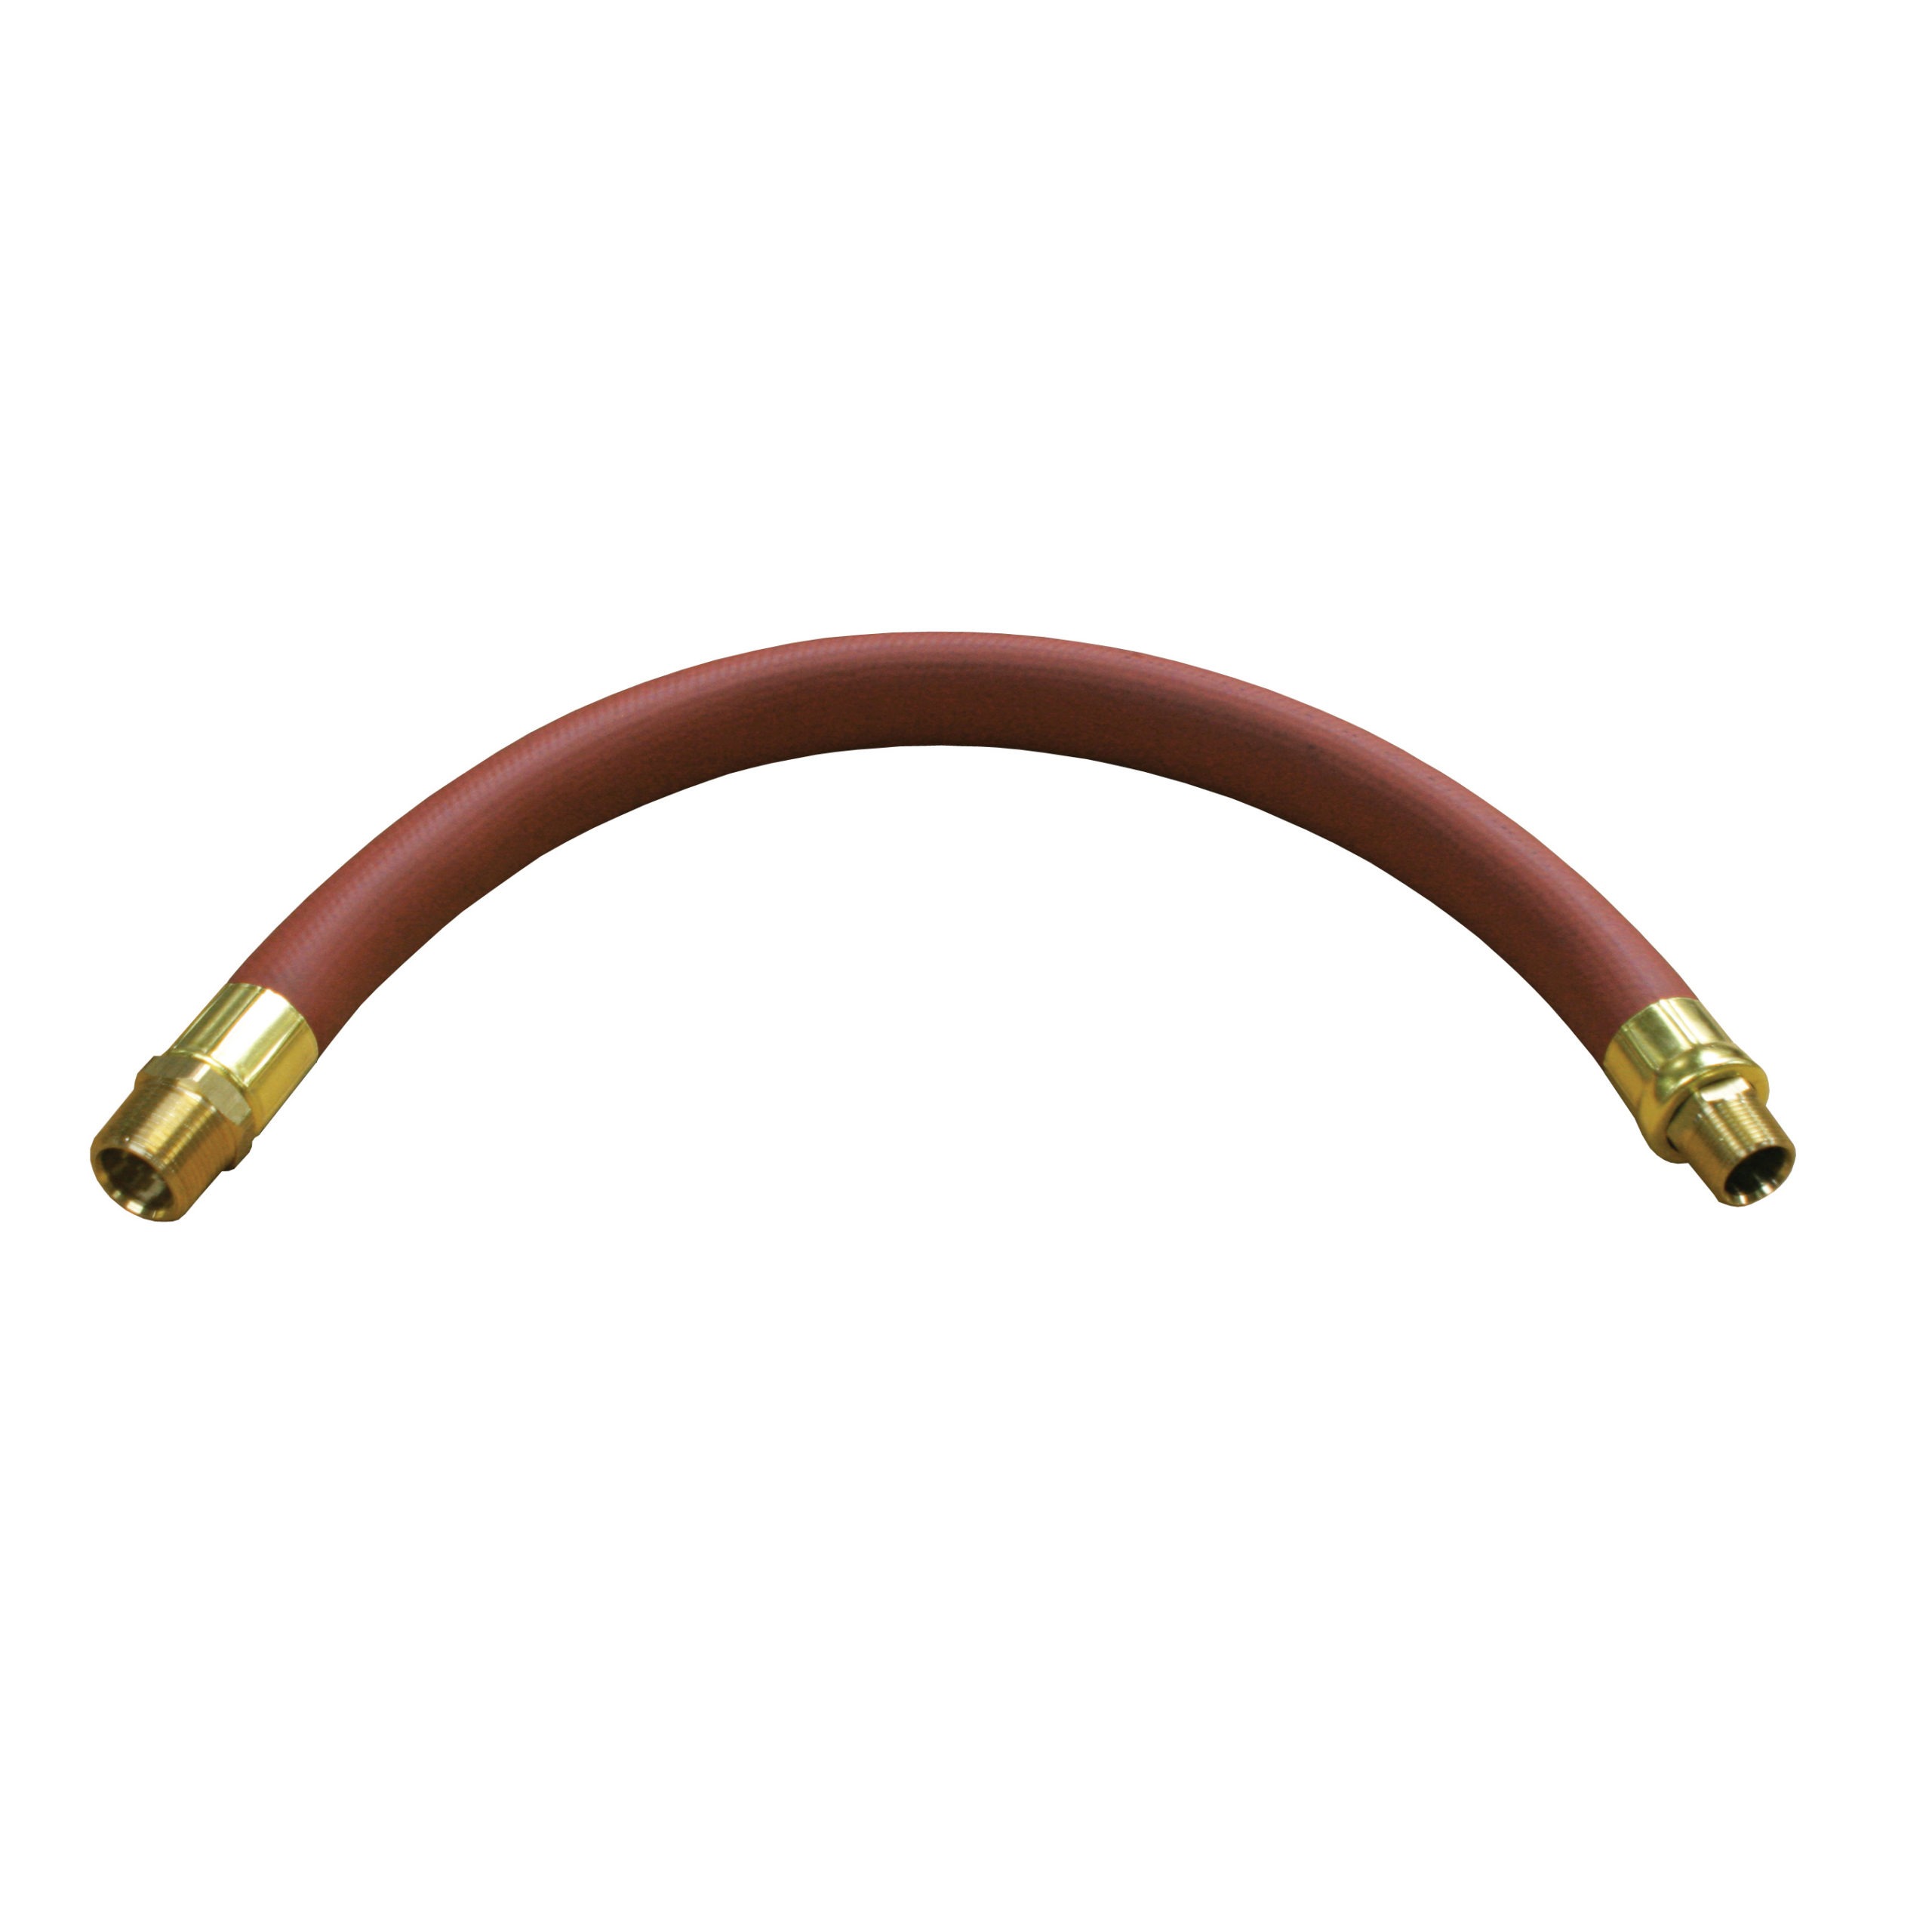 Reelcraft S601026-2 - 3/4 in. x 2 ft. Air/Water Inlet Hose